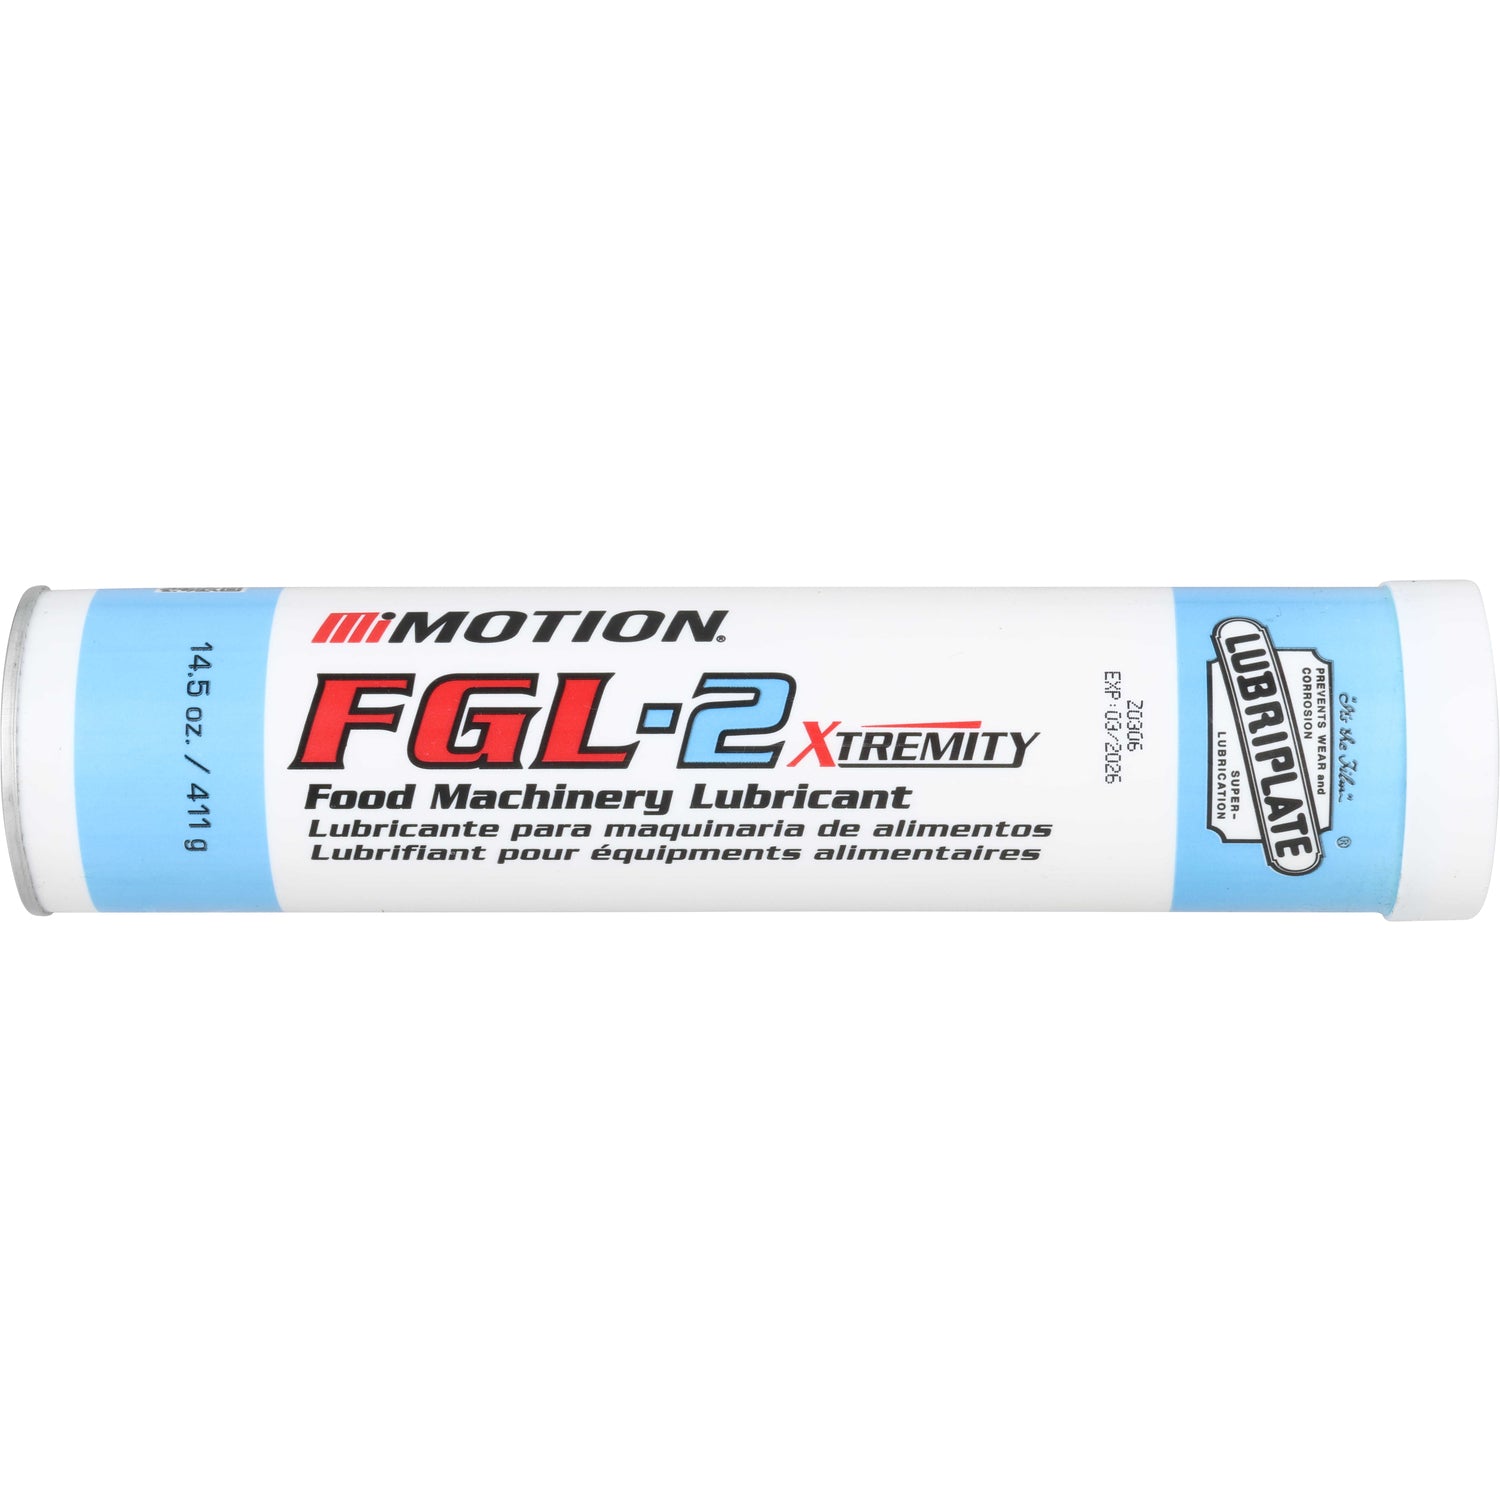 13oz blue and white tube of grease on white background. Text reads &quot;Motion FGL-2 Xtremity Food Machinery Lubricant, Lubricante para maquinaria de alimentos, lubrifiant pour equipments alimentaires.&quot;